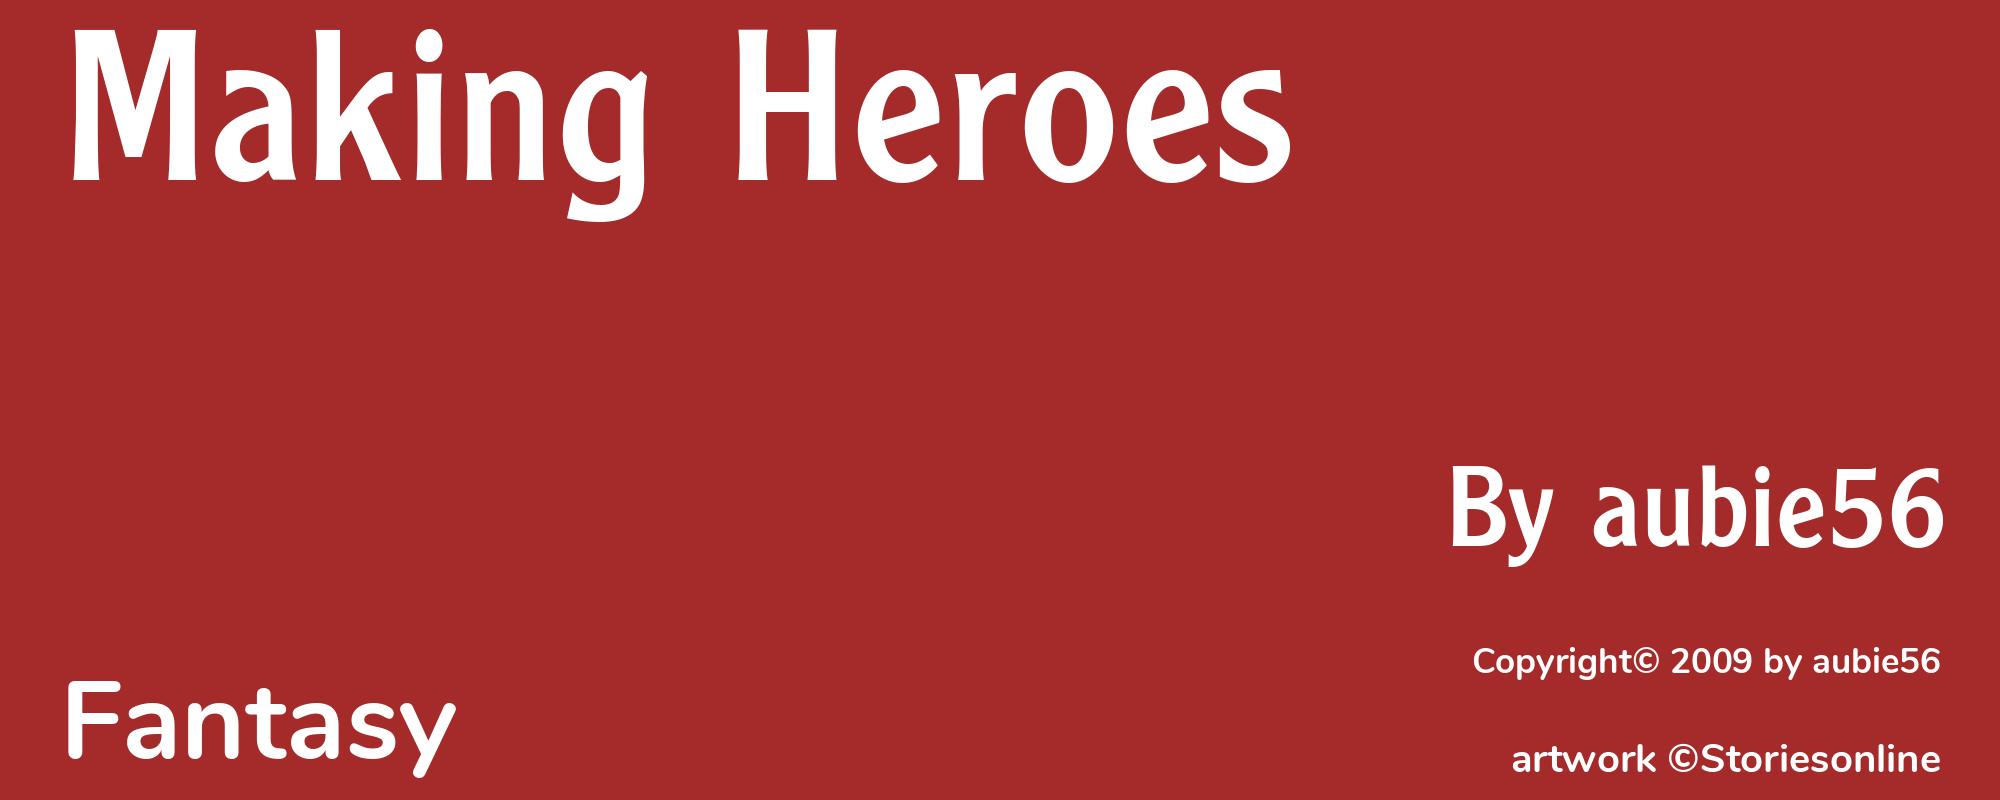 Making Heroes - Cover